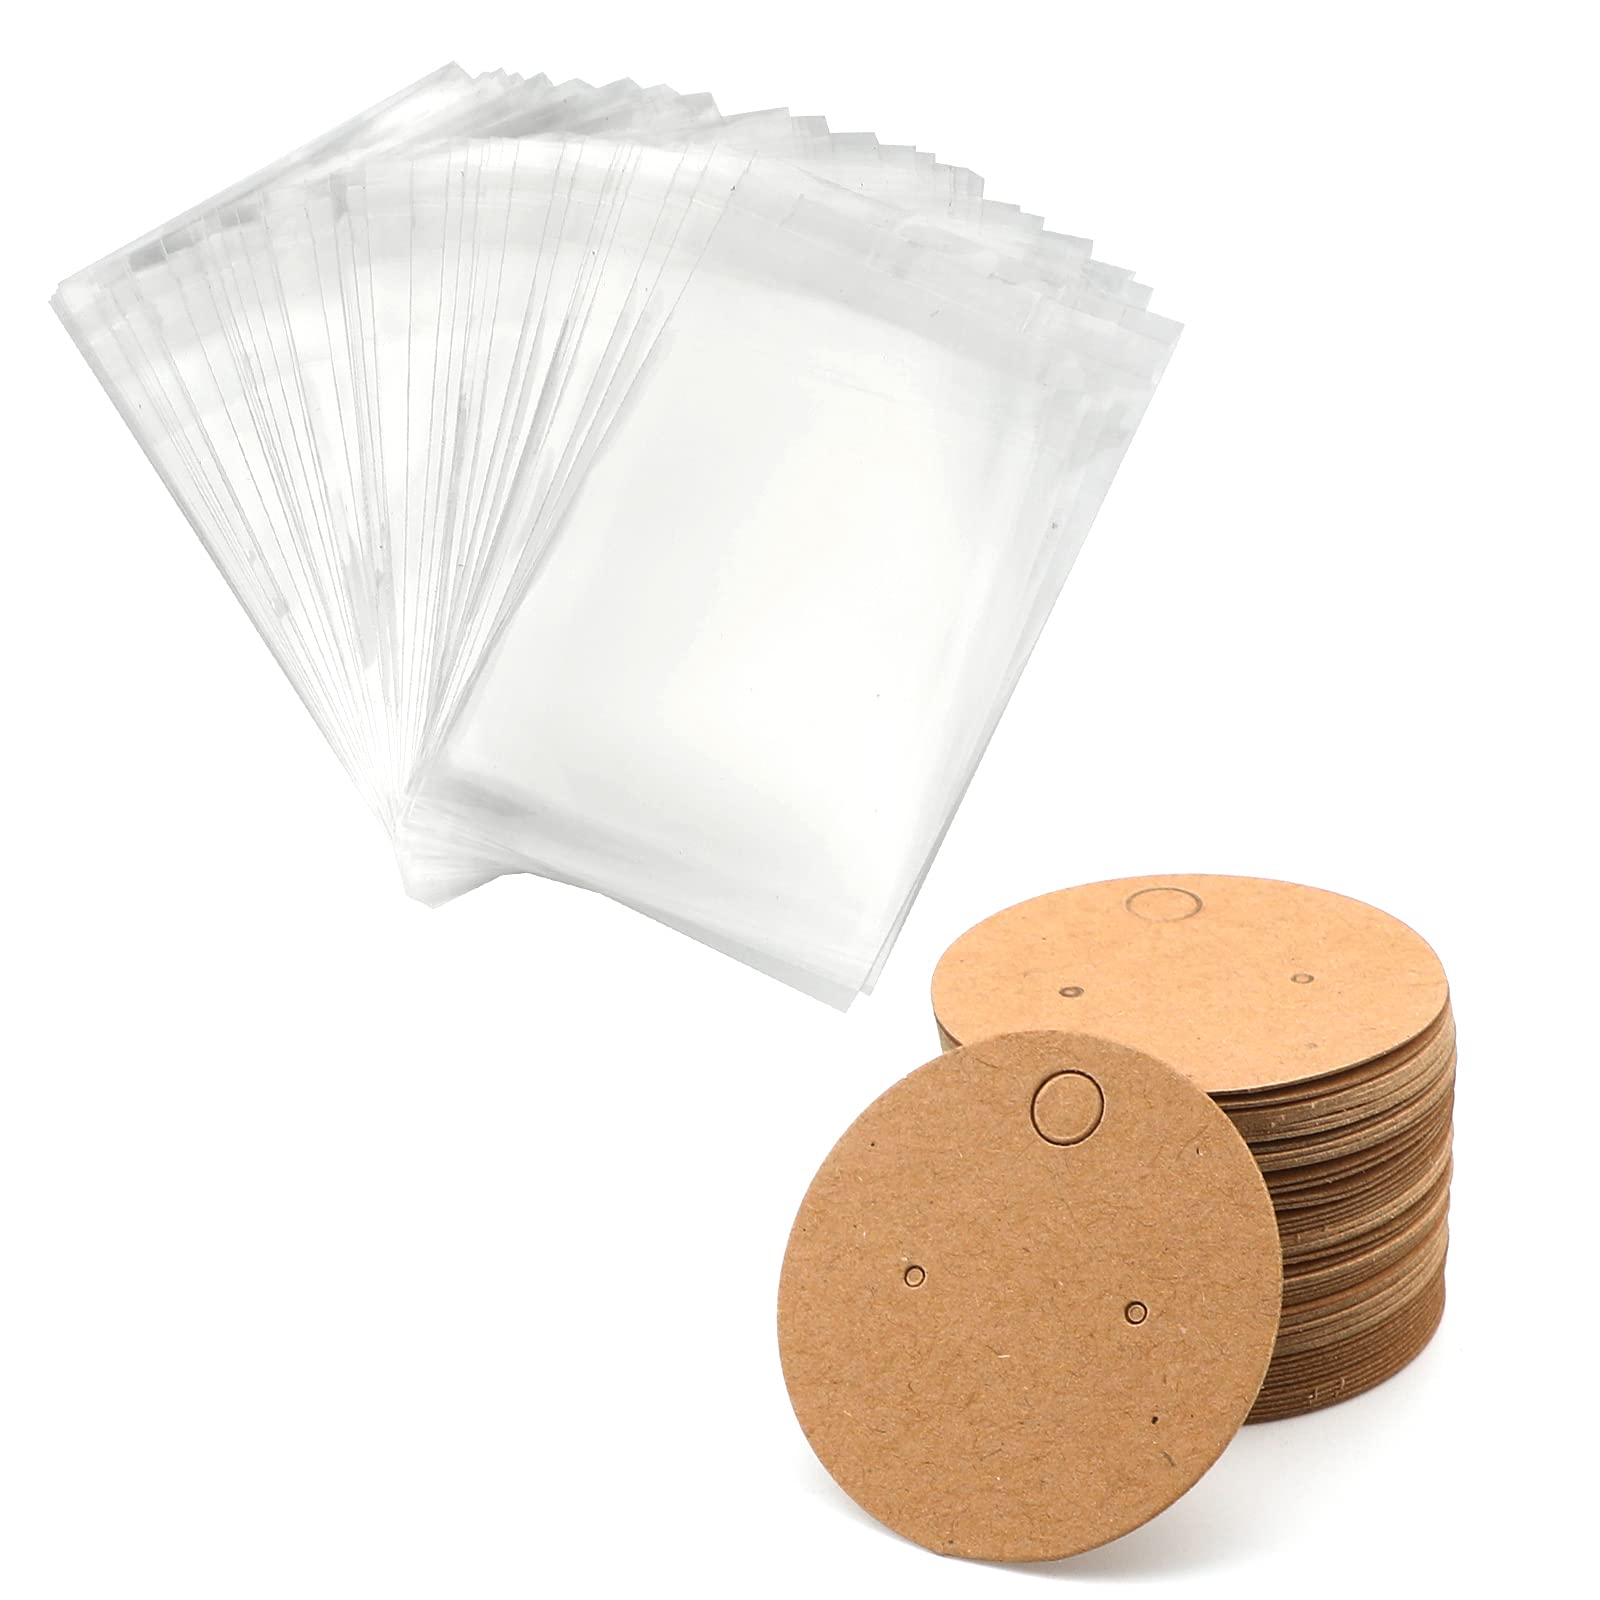 50pcs Jewelry Plastic Self-adhesive Bags With Hanging Hole, Diy Jewelry  Packaging & Display Bags